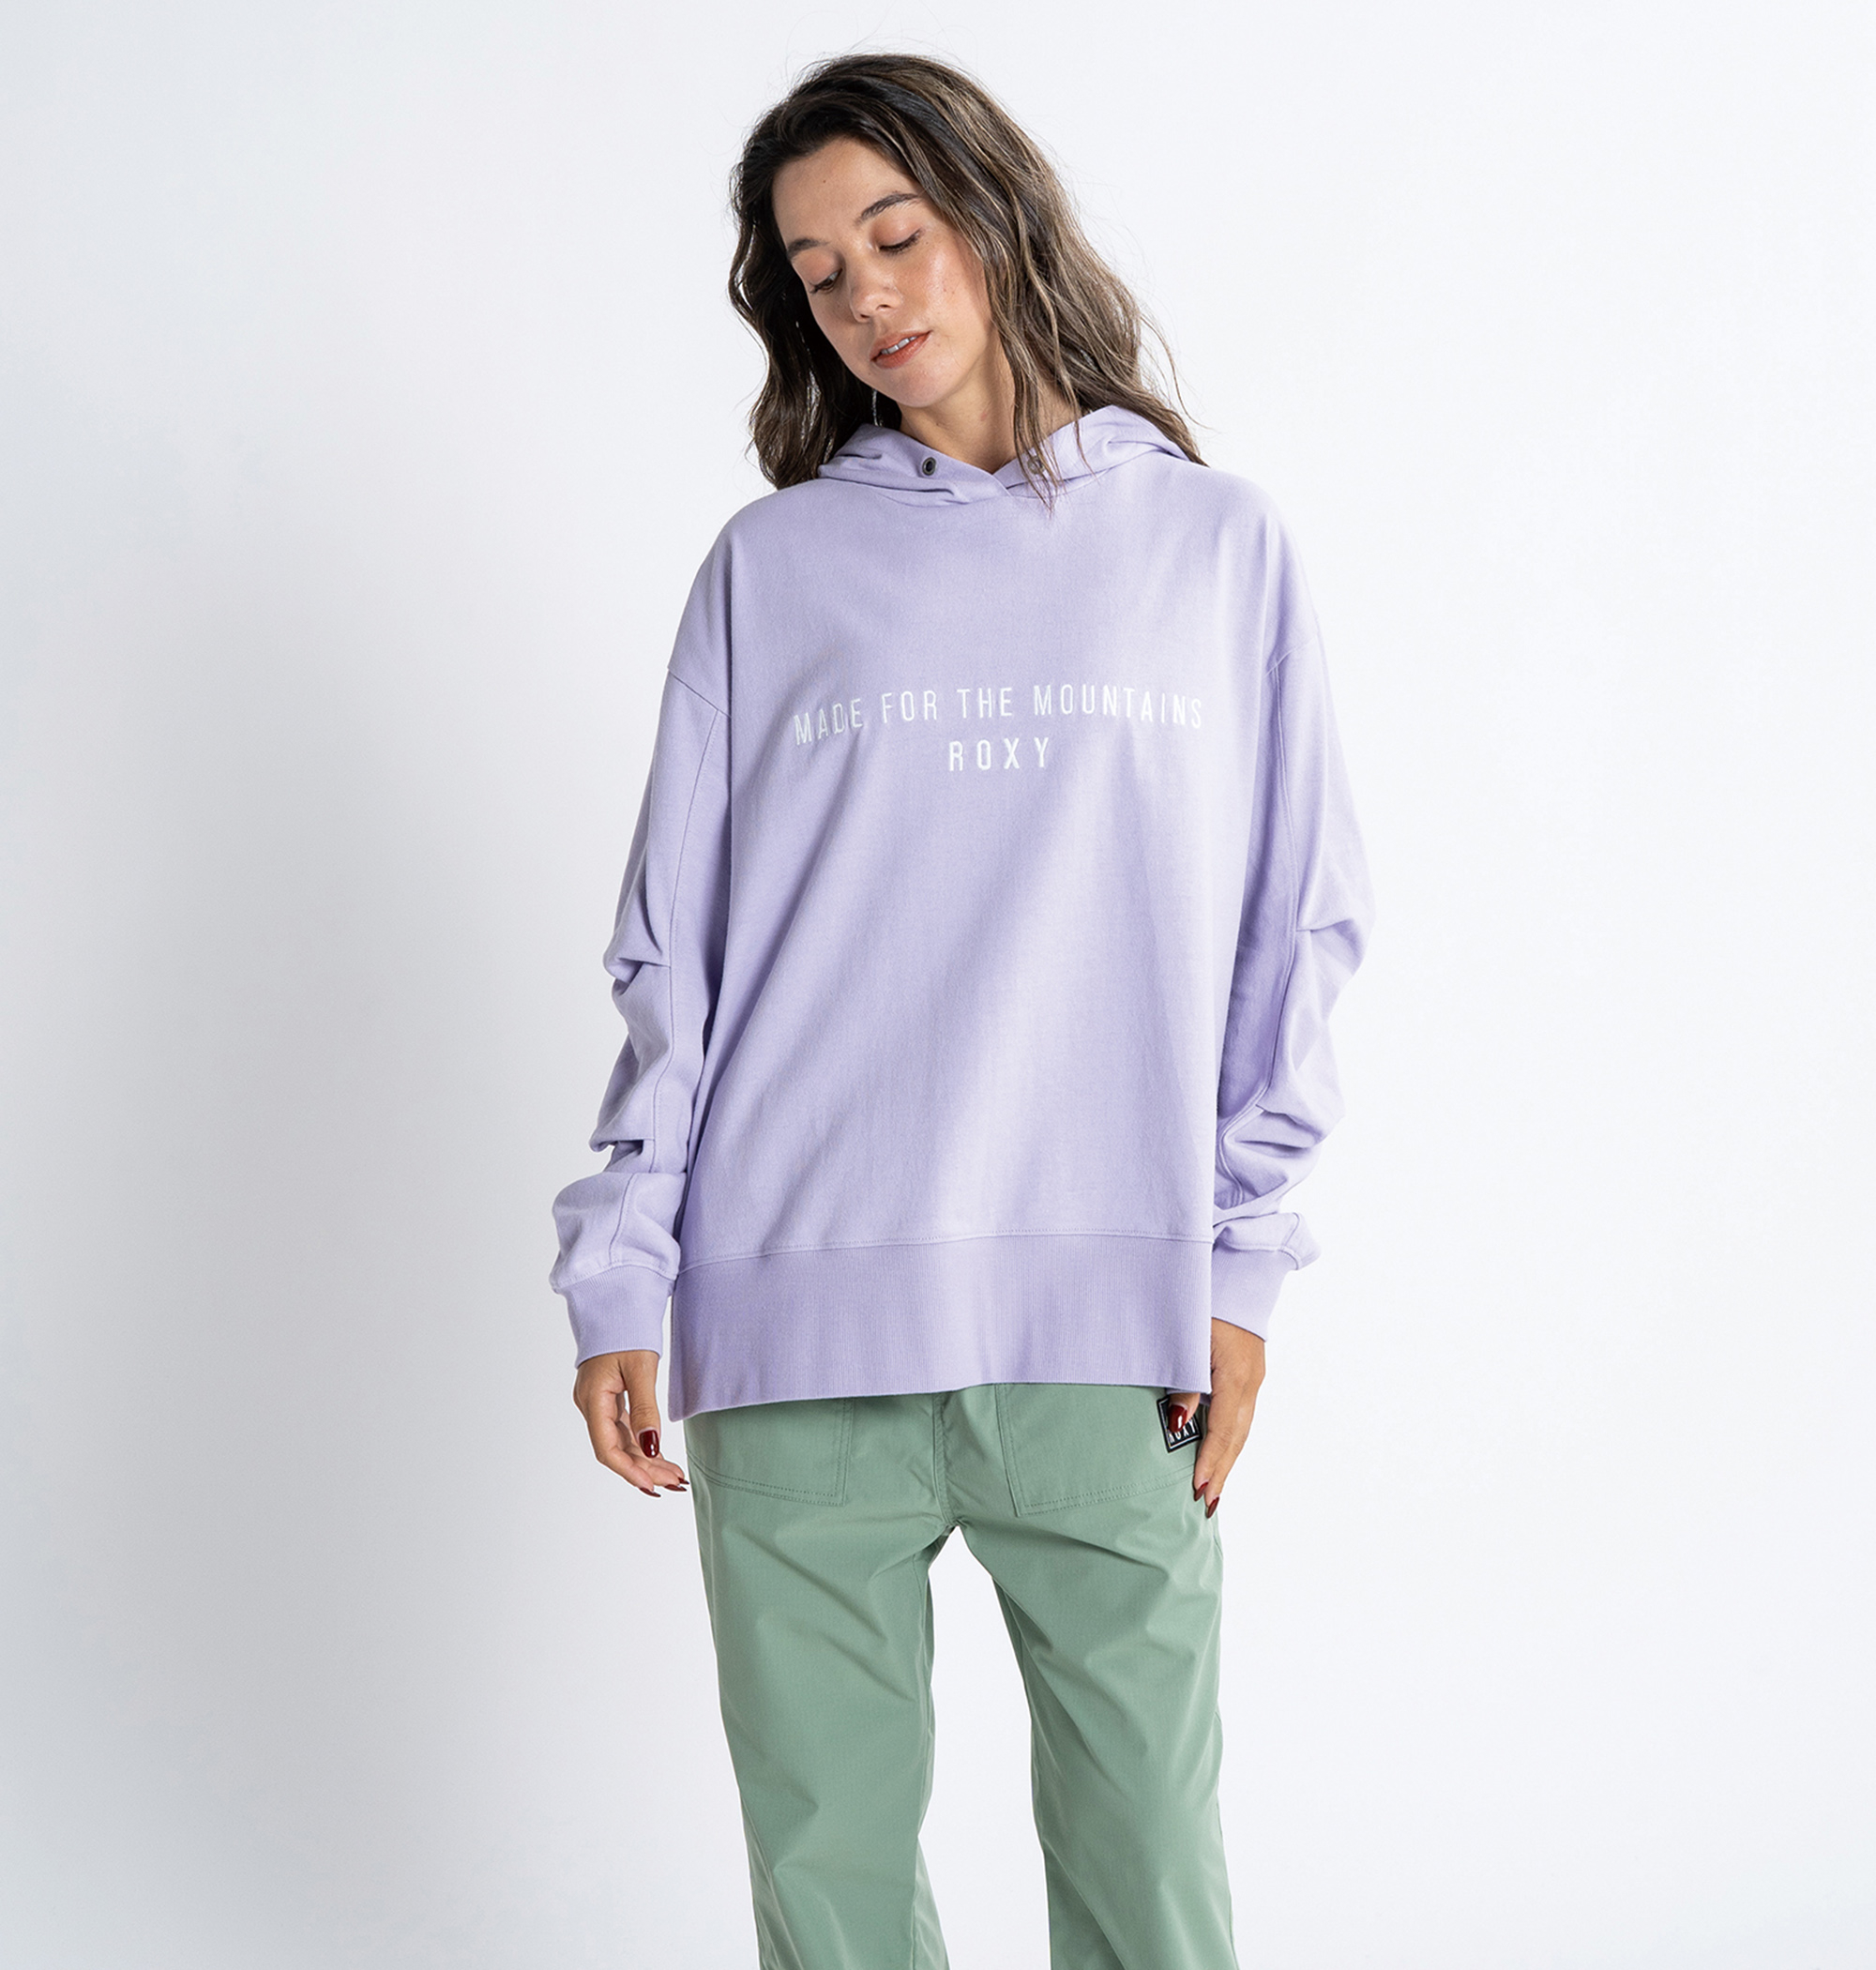 30%OFF セール SALE Roxy ロキシー MADE FOR THE MOUNTAINS HOODIE Tシャツ素材 フーディー Tシャツ ティーシャツ